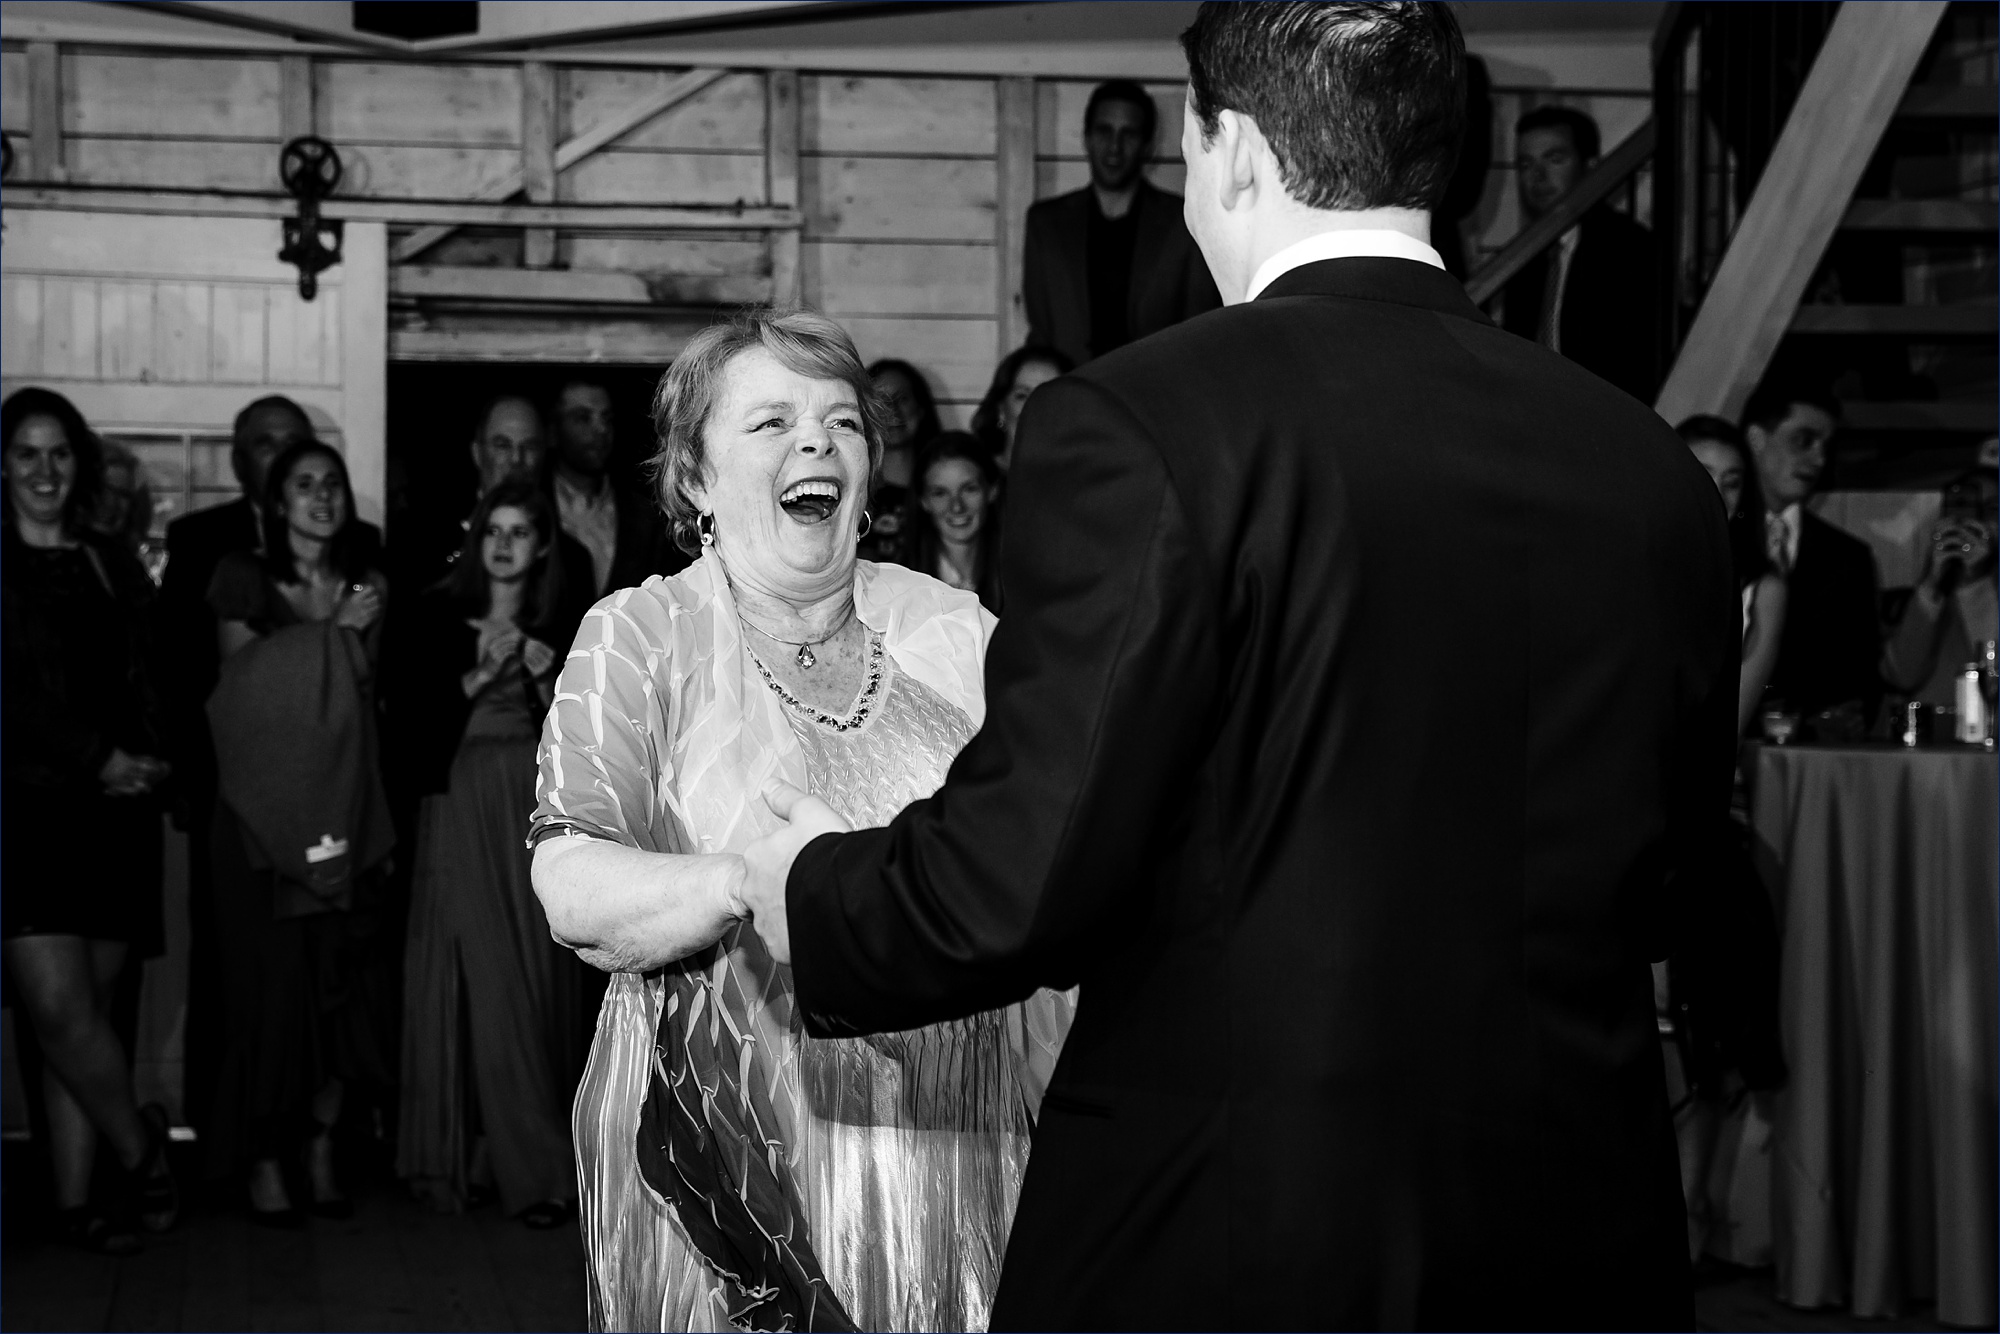 The groom and his mother dance in the barn at his Maine wedding